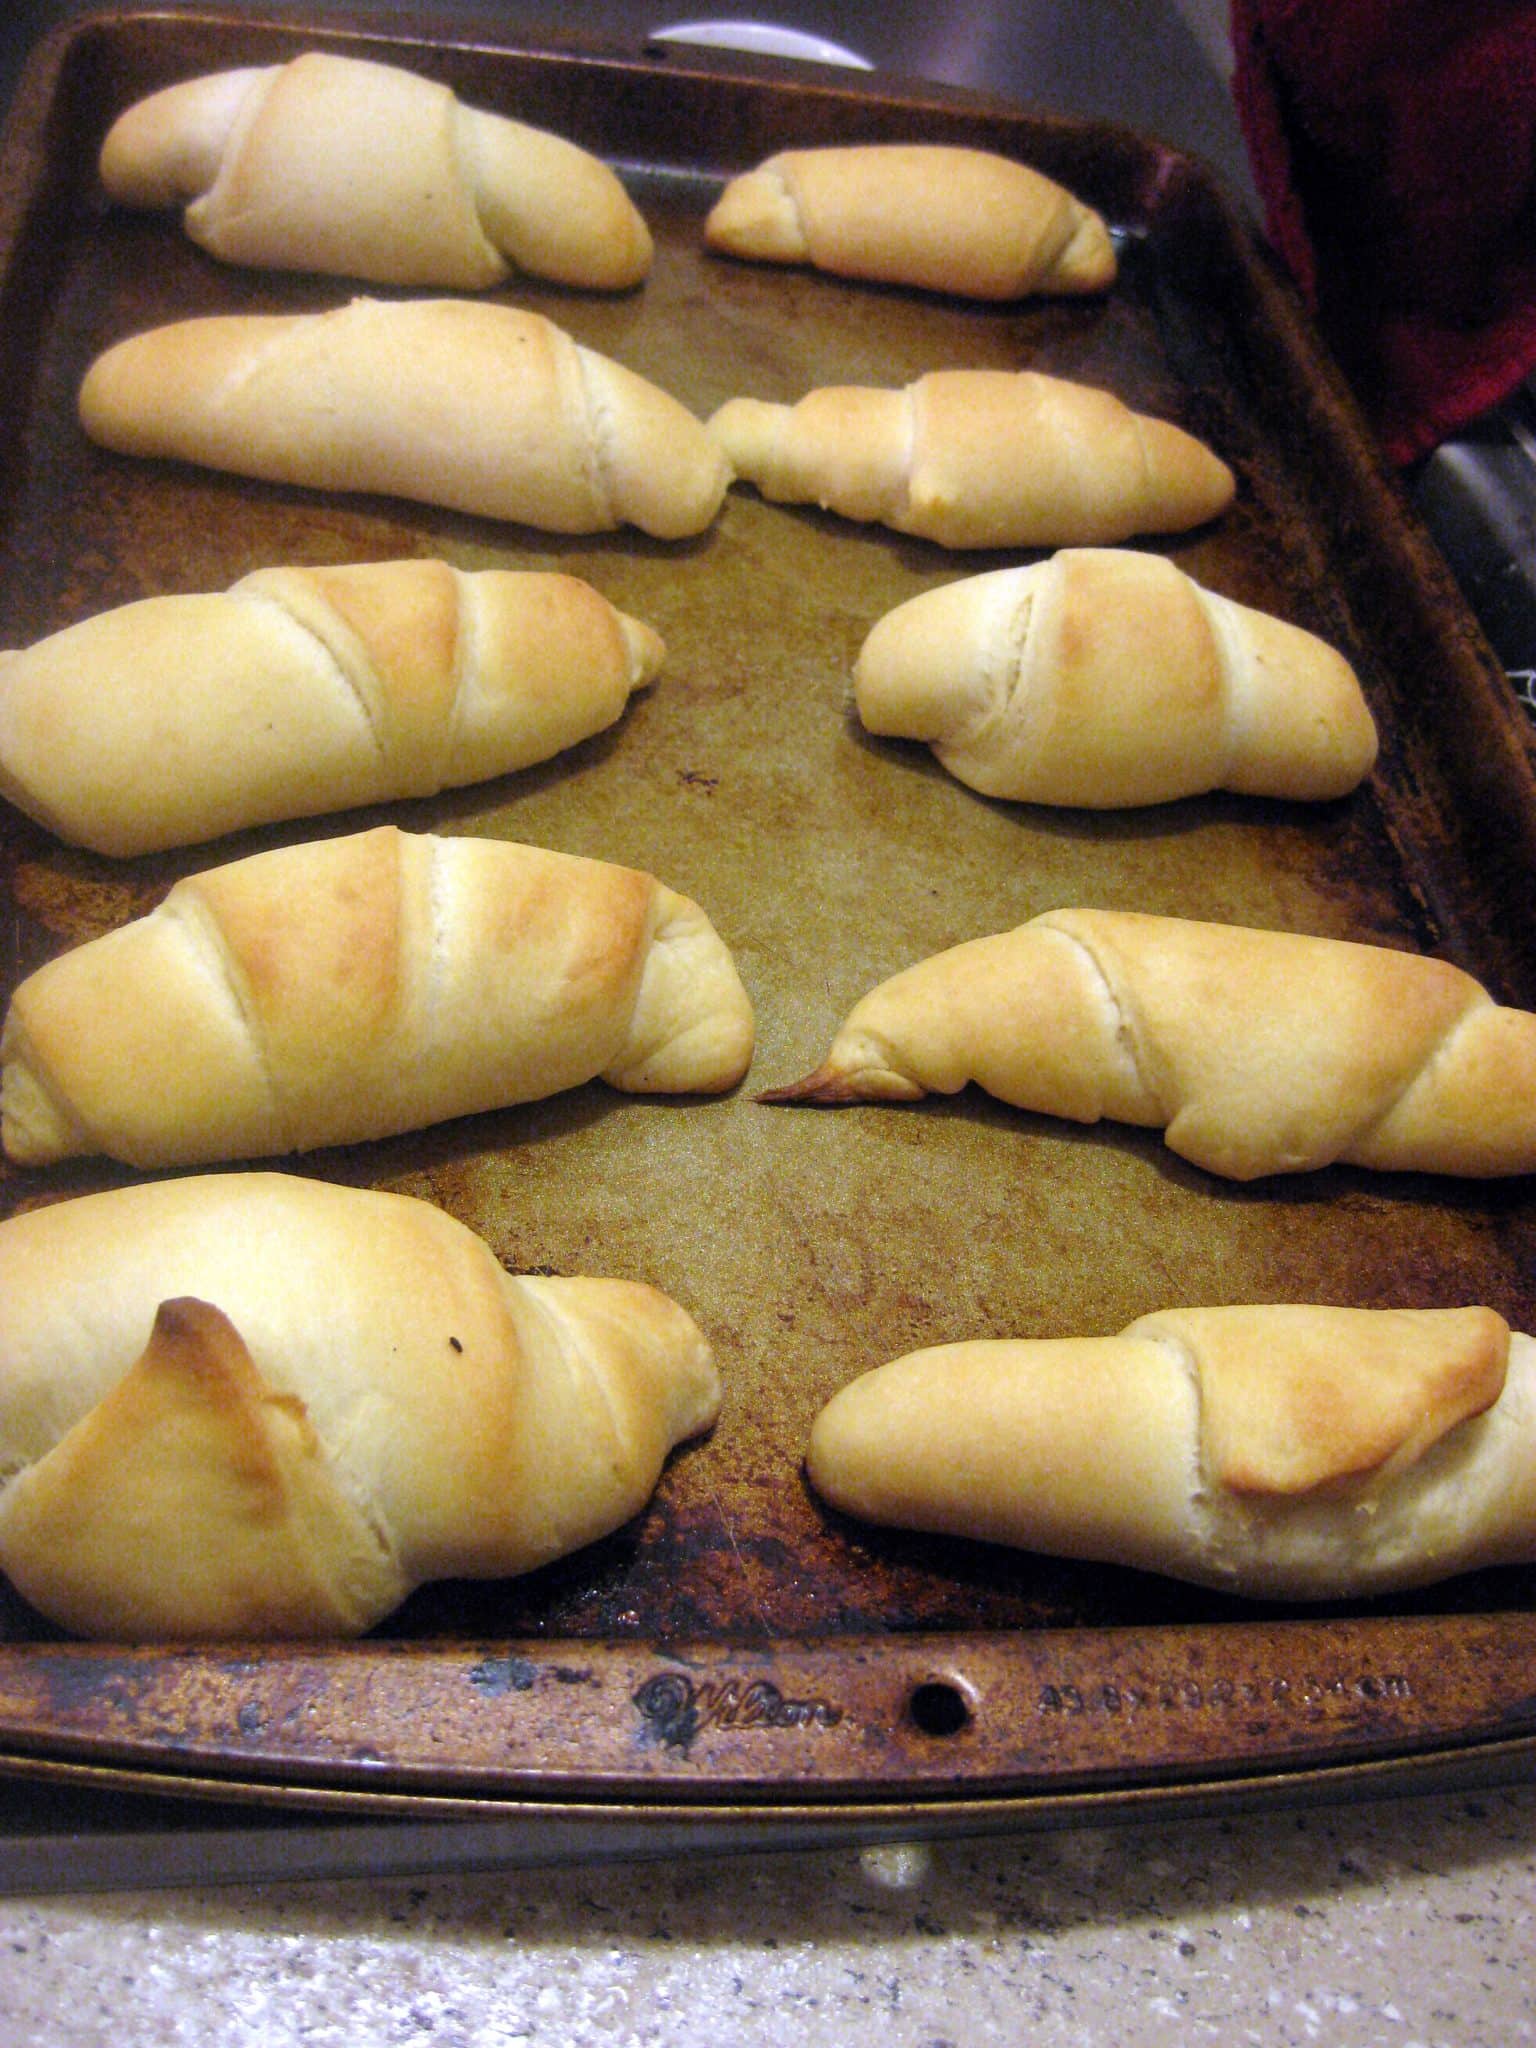 Angled view of crescent rolls on a baking pan.